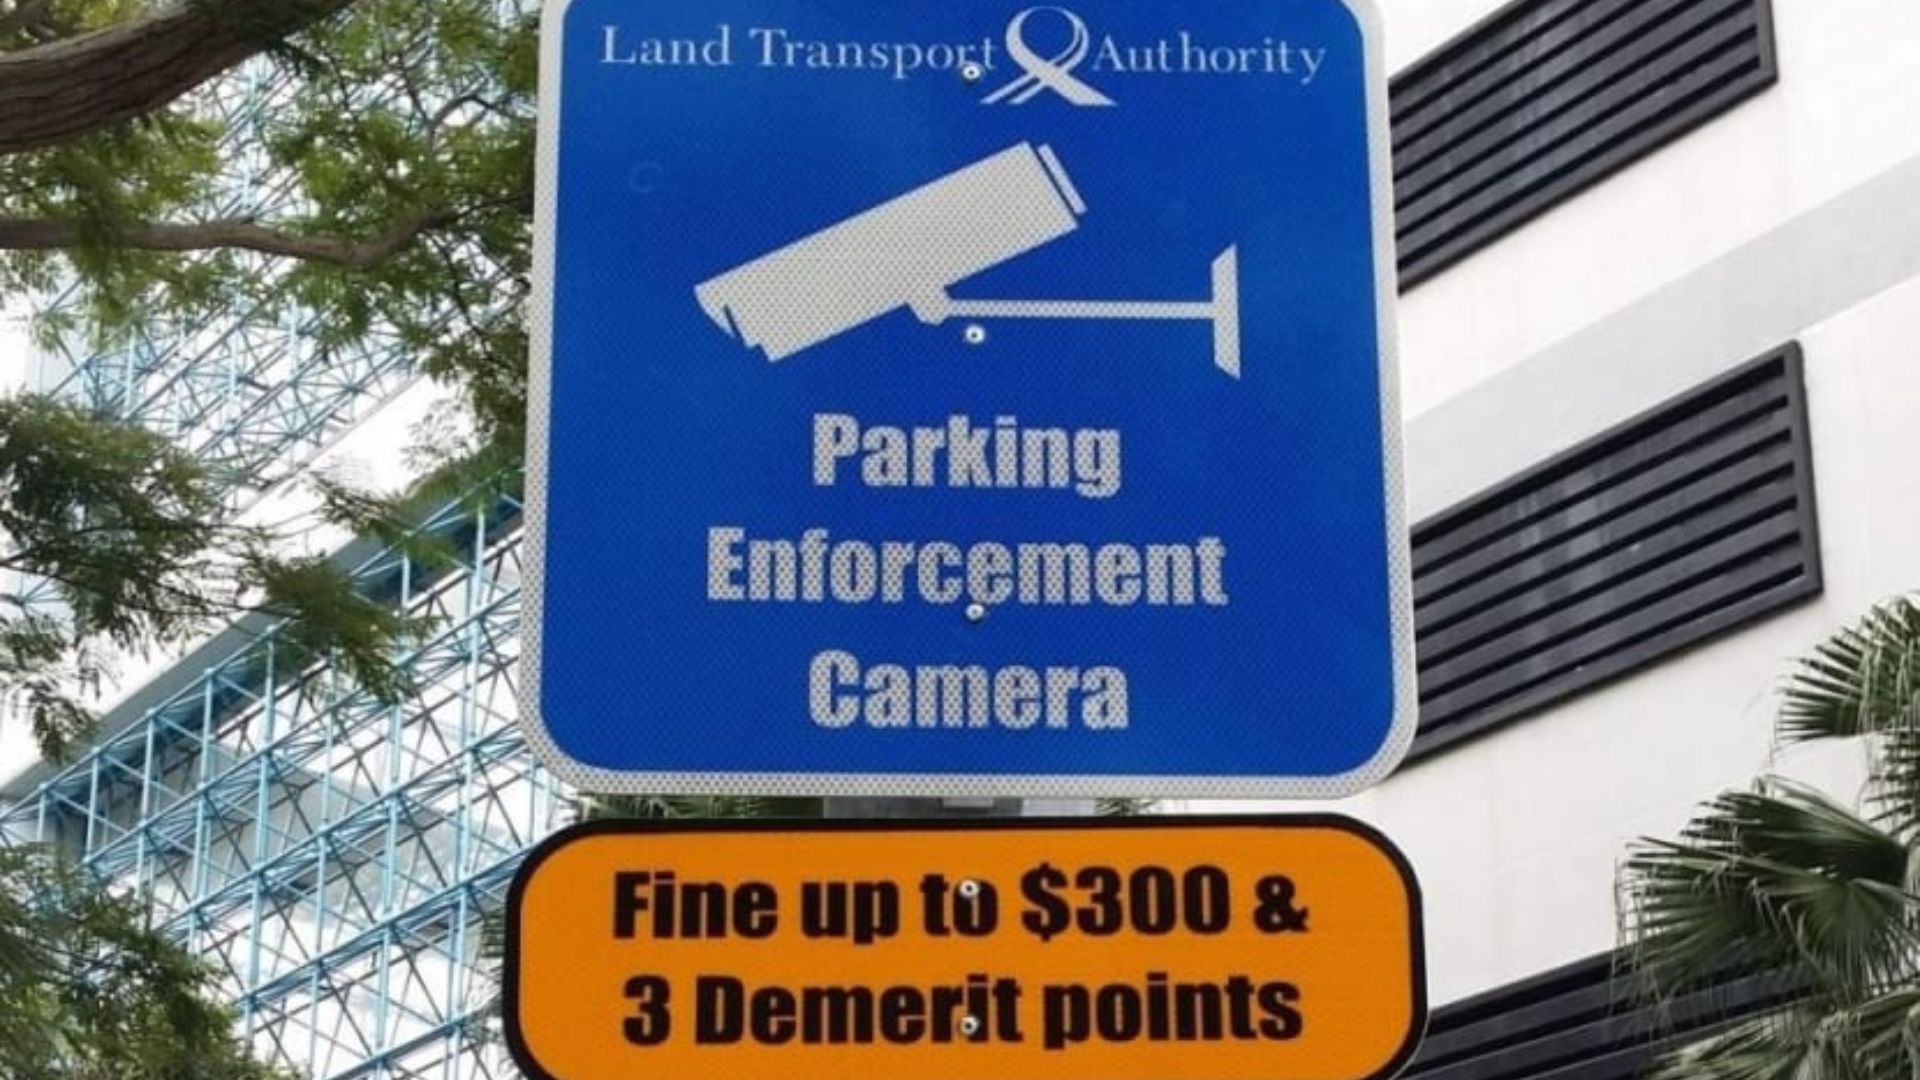 Enforcement cameras: Ride-hailing drivers can’t park but can they wait?